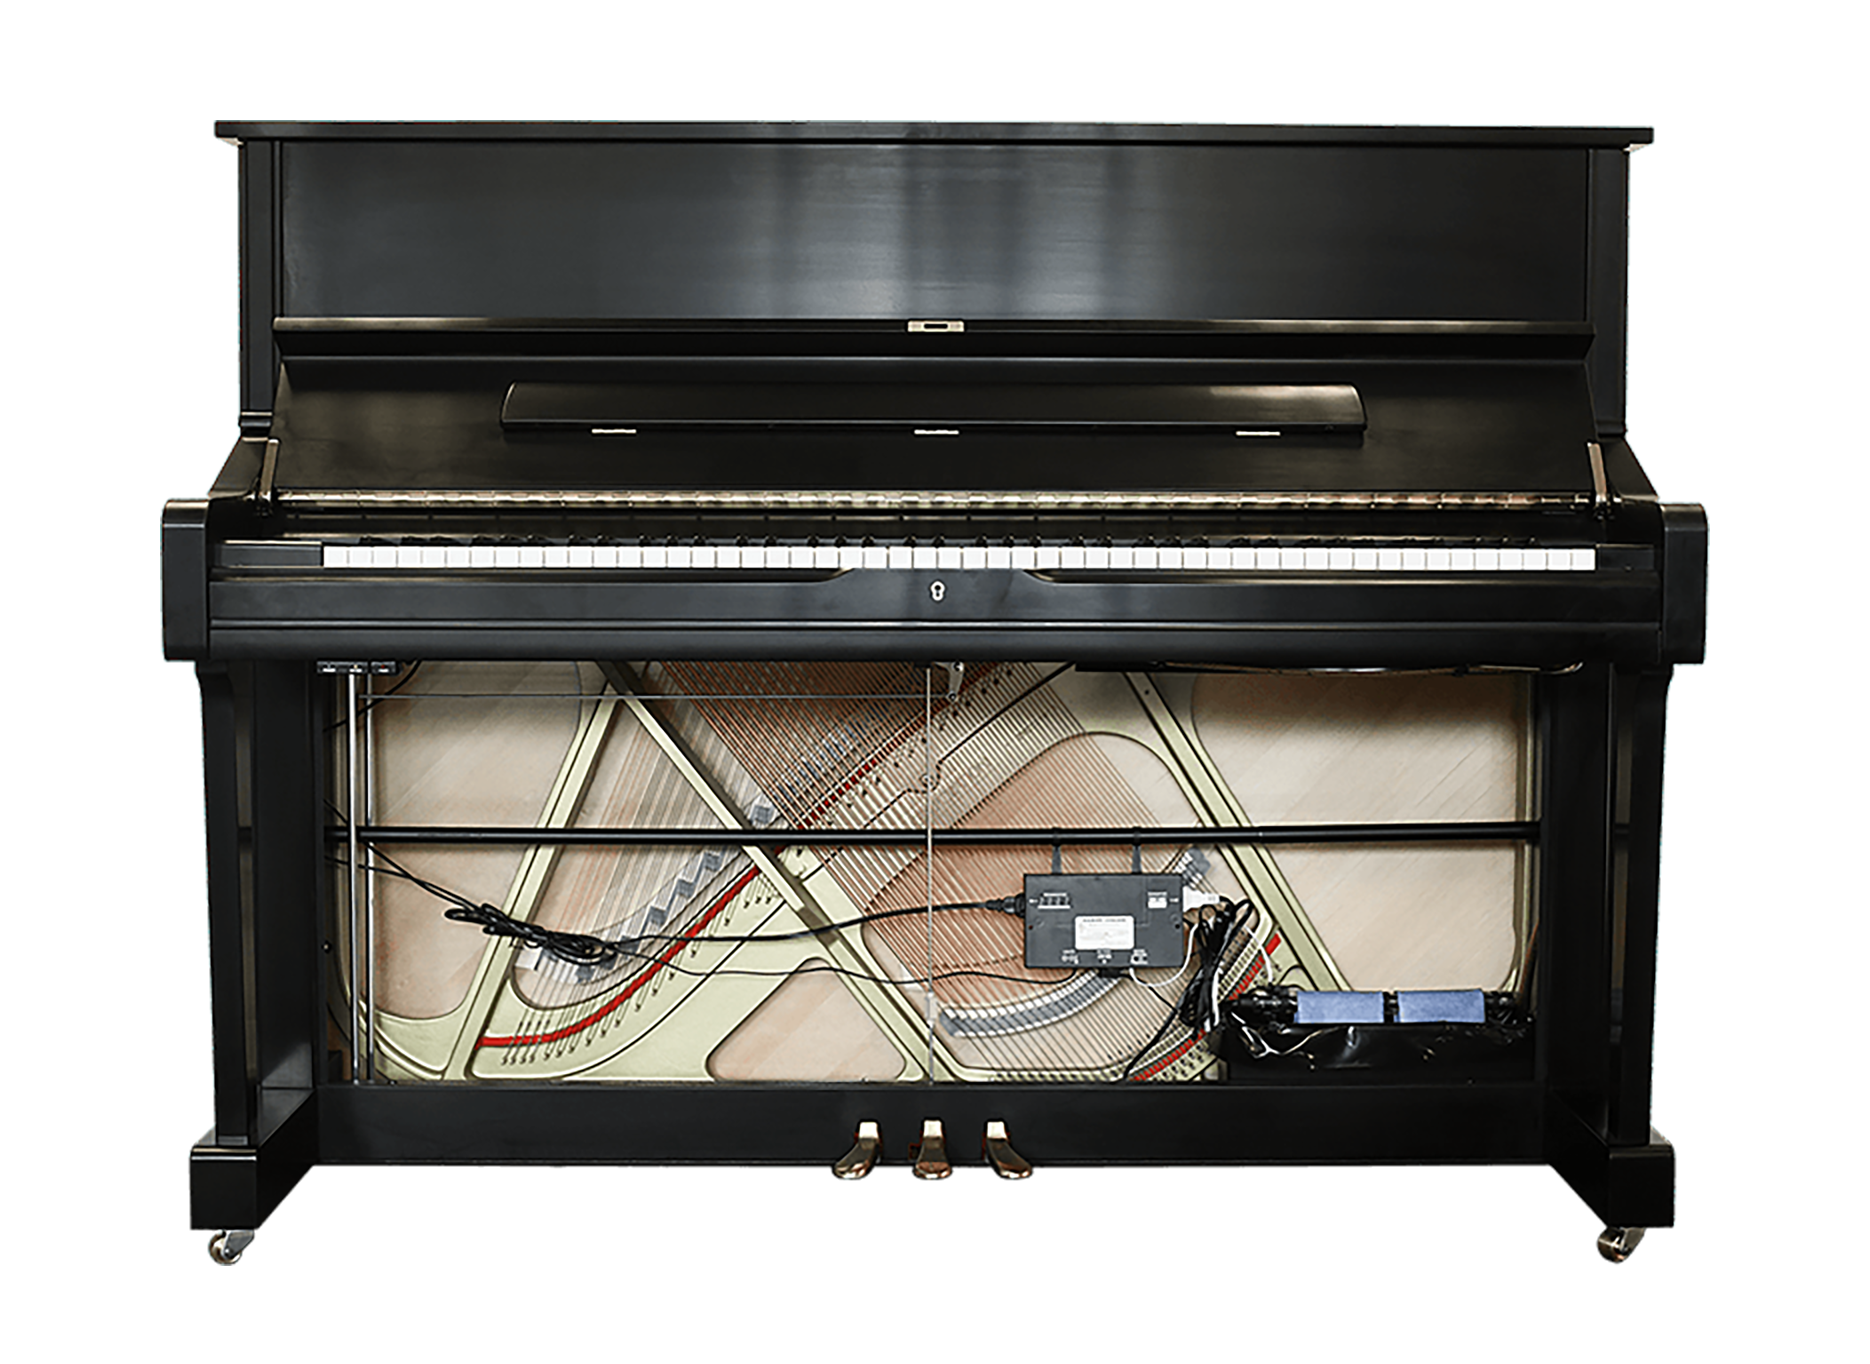 humidity control system installed on an upright piano